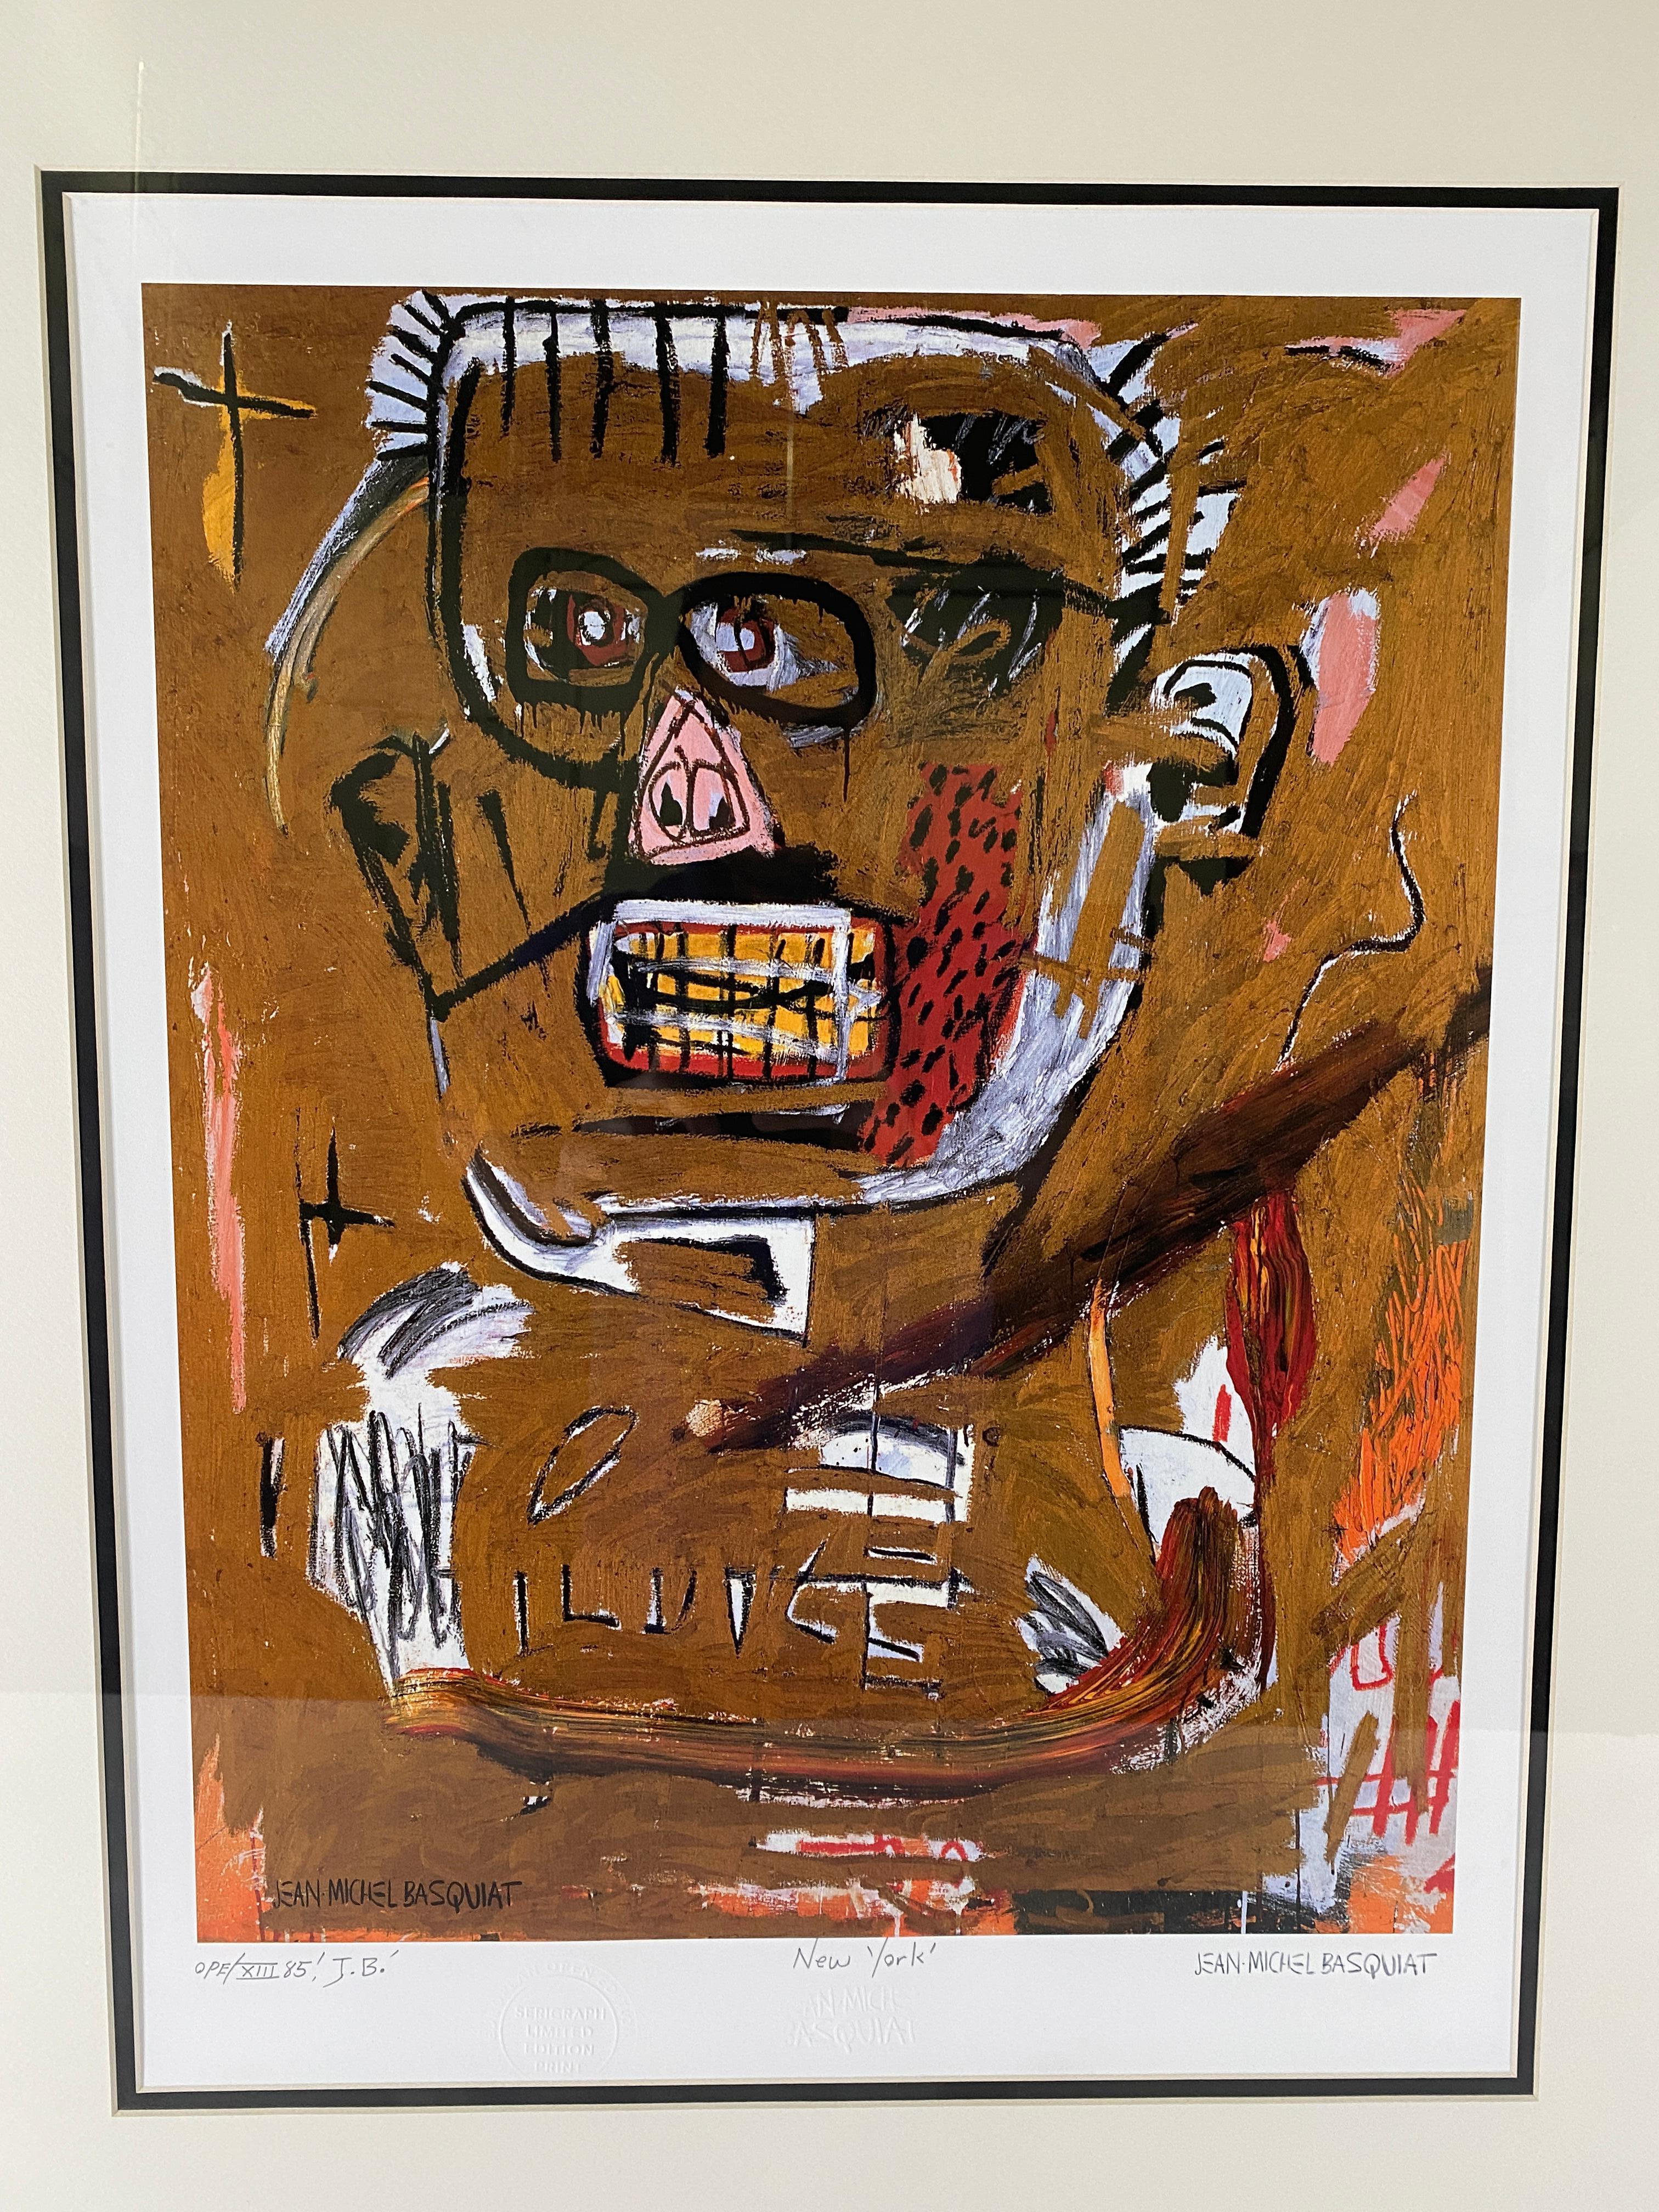 Signed limited edition print by Jean Michel Basquiat.
Certificate of Authenticity en verso.
Beautifully matted and framed
From an important Palm Springs, CA Collection.